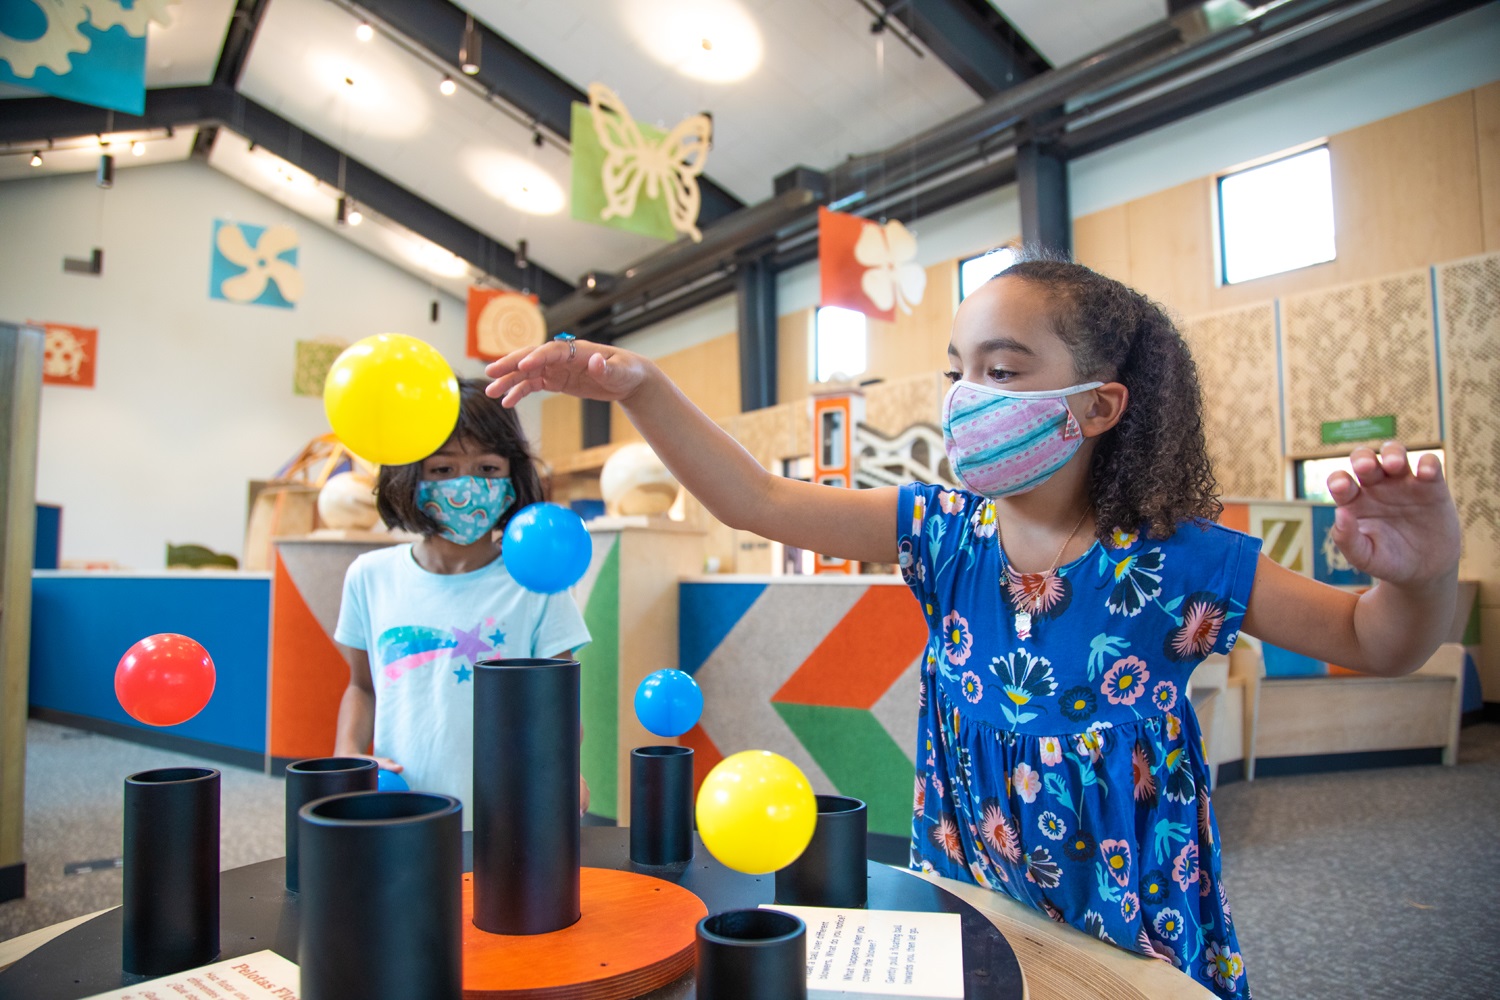 Two children learn about gravity by using the Curious by Nature exhibit